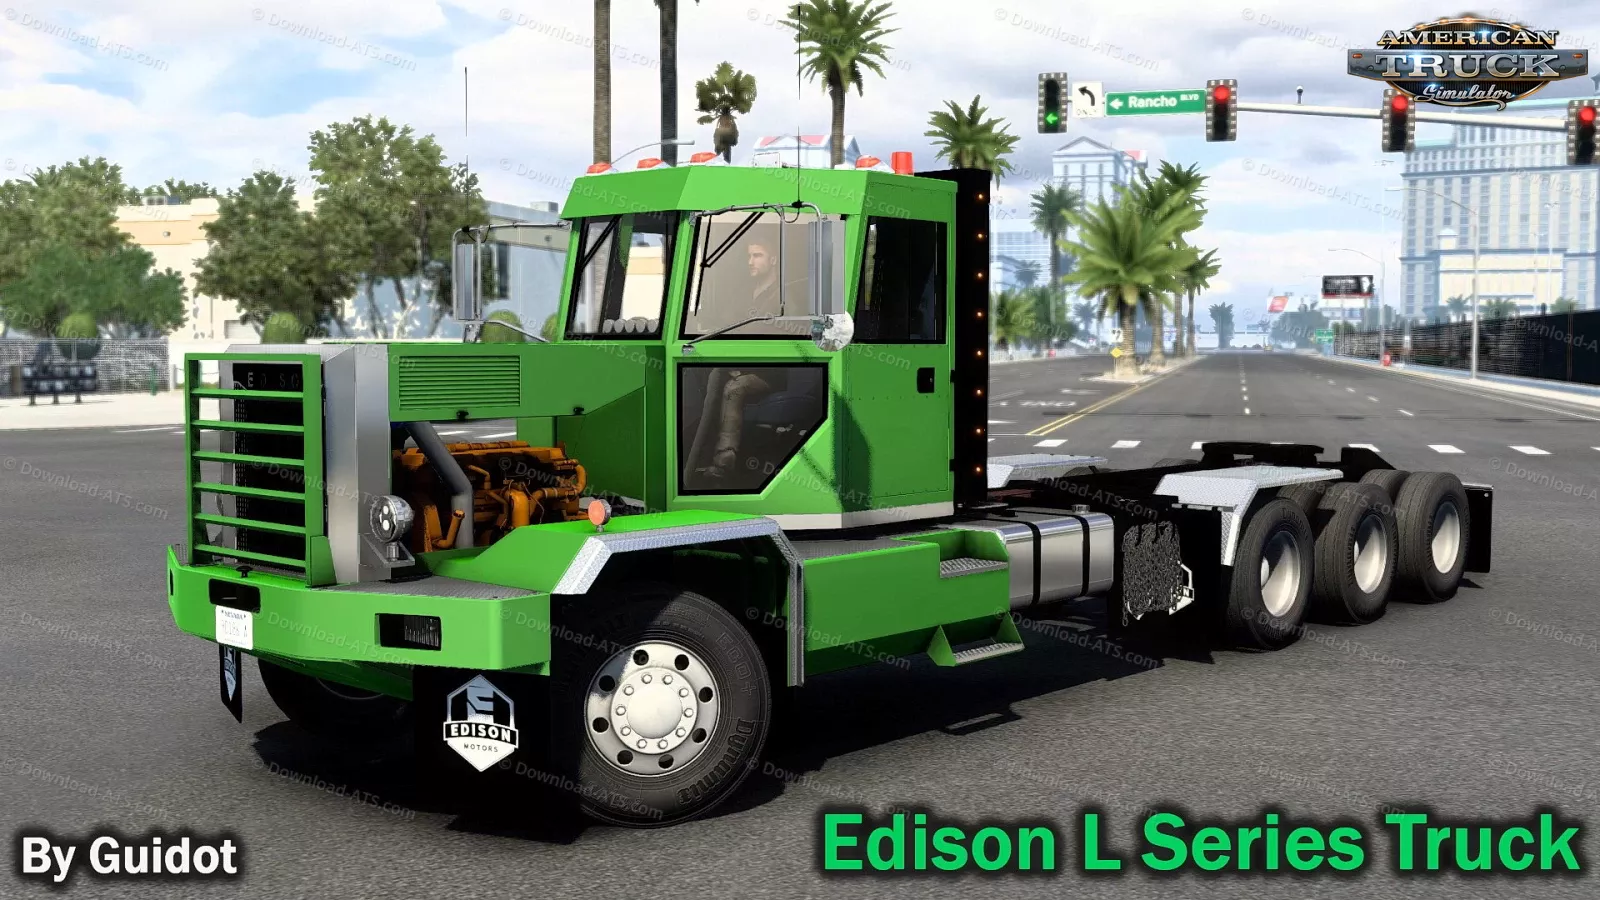 Edison L Series Truck v0.1i By Guidot (1.50.x) for ATS